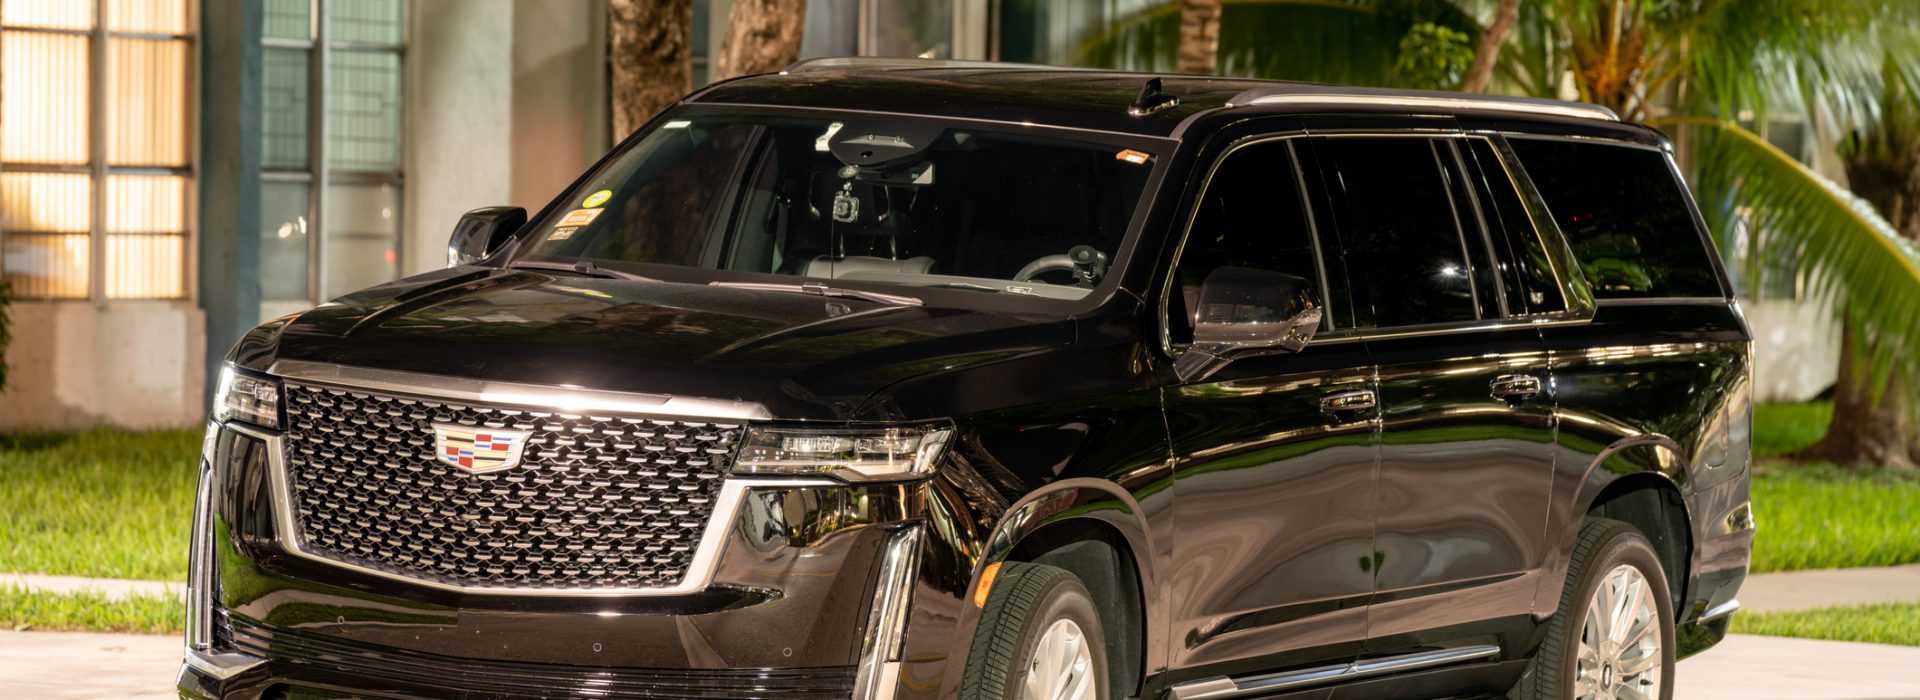 Sunny Isles Beach, FL, USA - October 21, 2021: Night photo of a Cadillac Escalade luxury suv limo used for Uber and Lyft